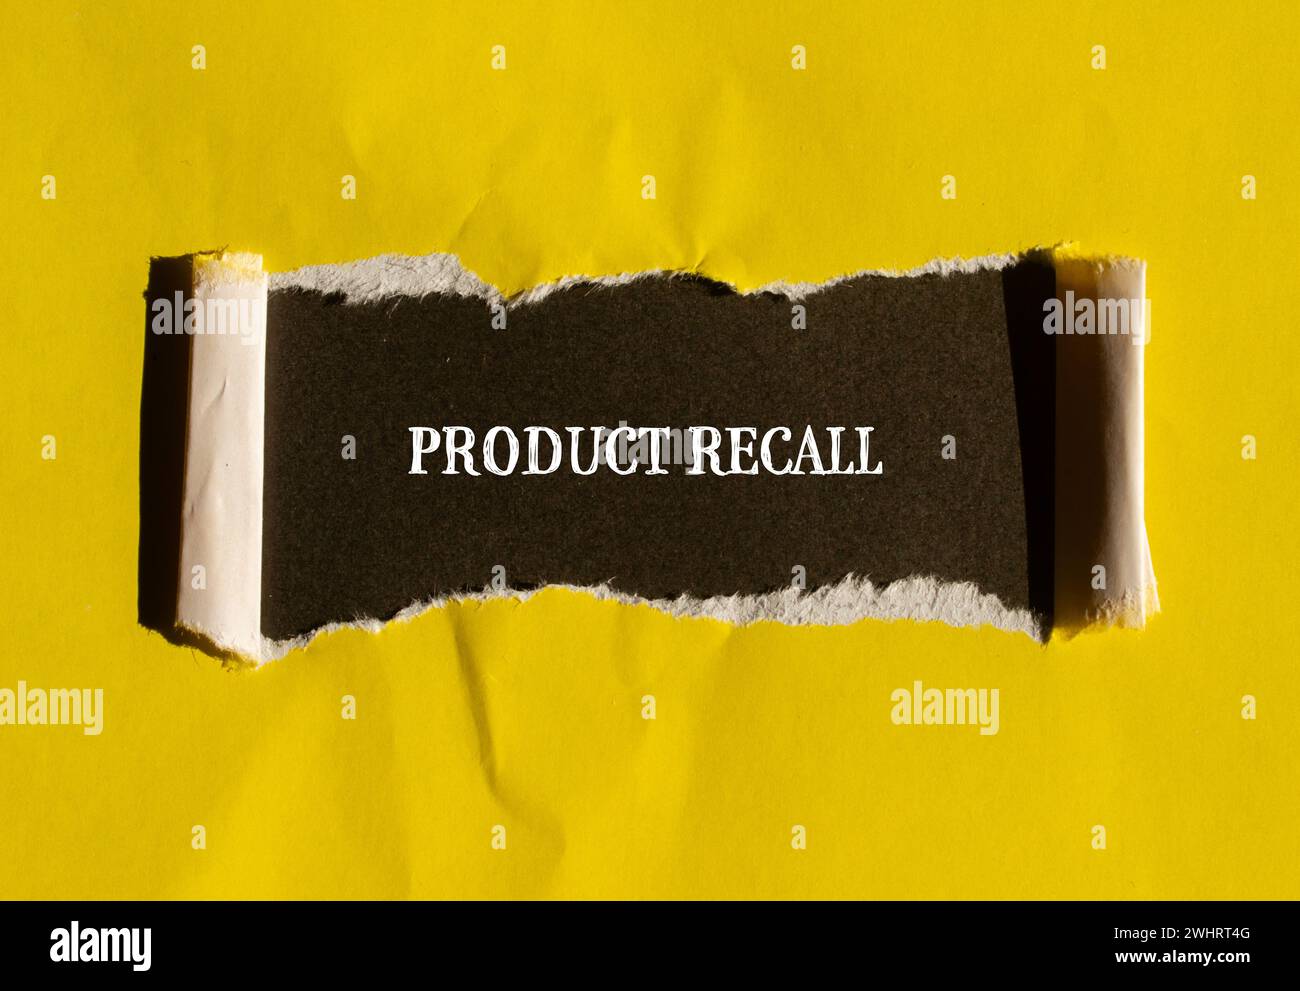 Product recall words written on torn yellow paper with black background. Conceptual business symbol. Copy space. Stock Photo